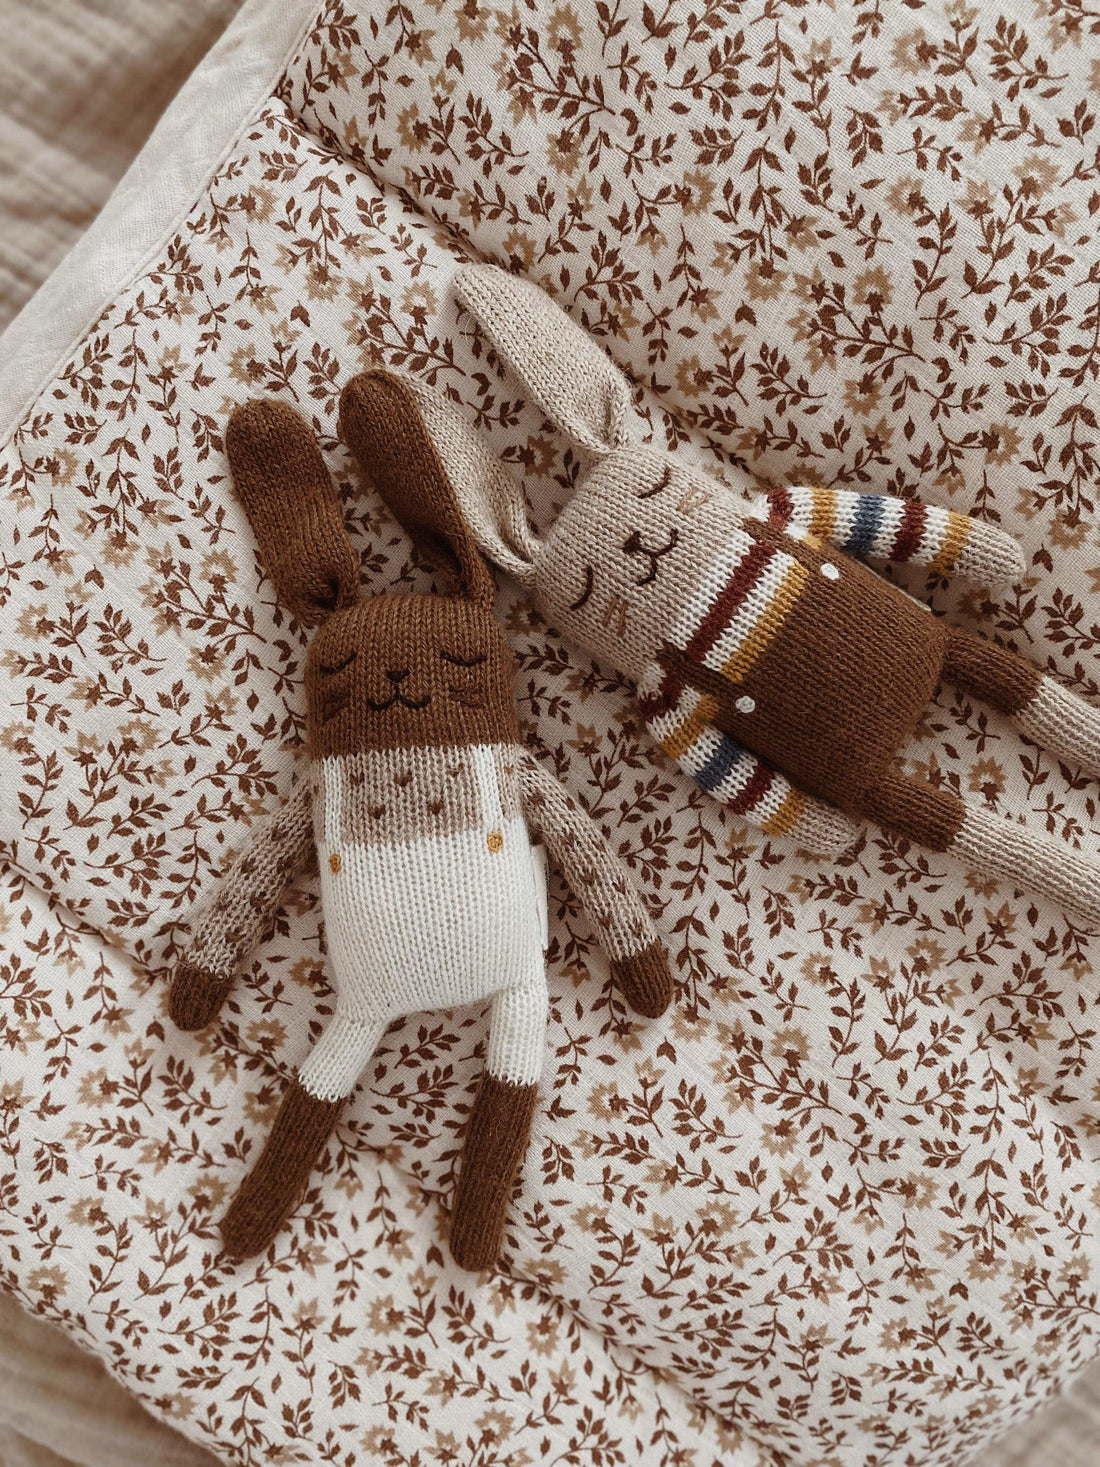 Main Sauvage Bunny Knitted Soft Toy, Ecru Overalls - Hello Little Birdie